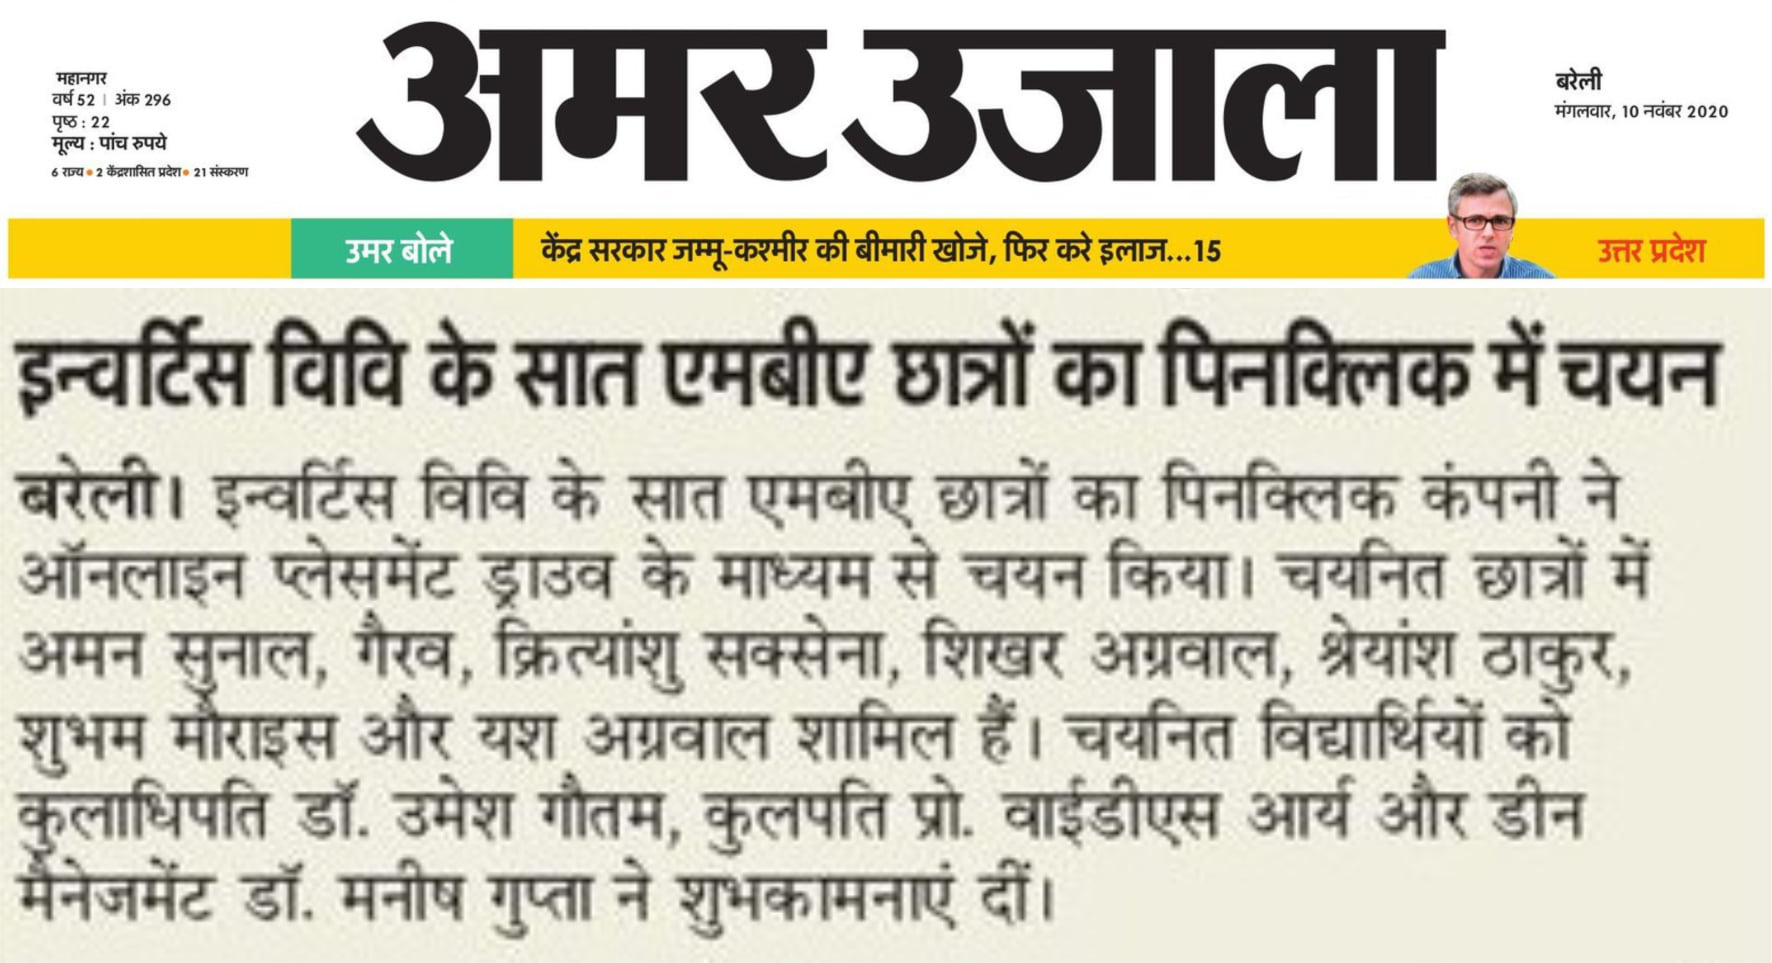  MBA Student Placement in Pinclick - Media Coverage by AmarUjala